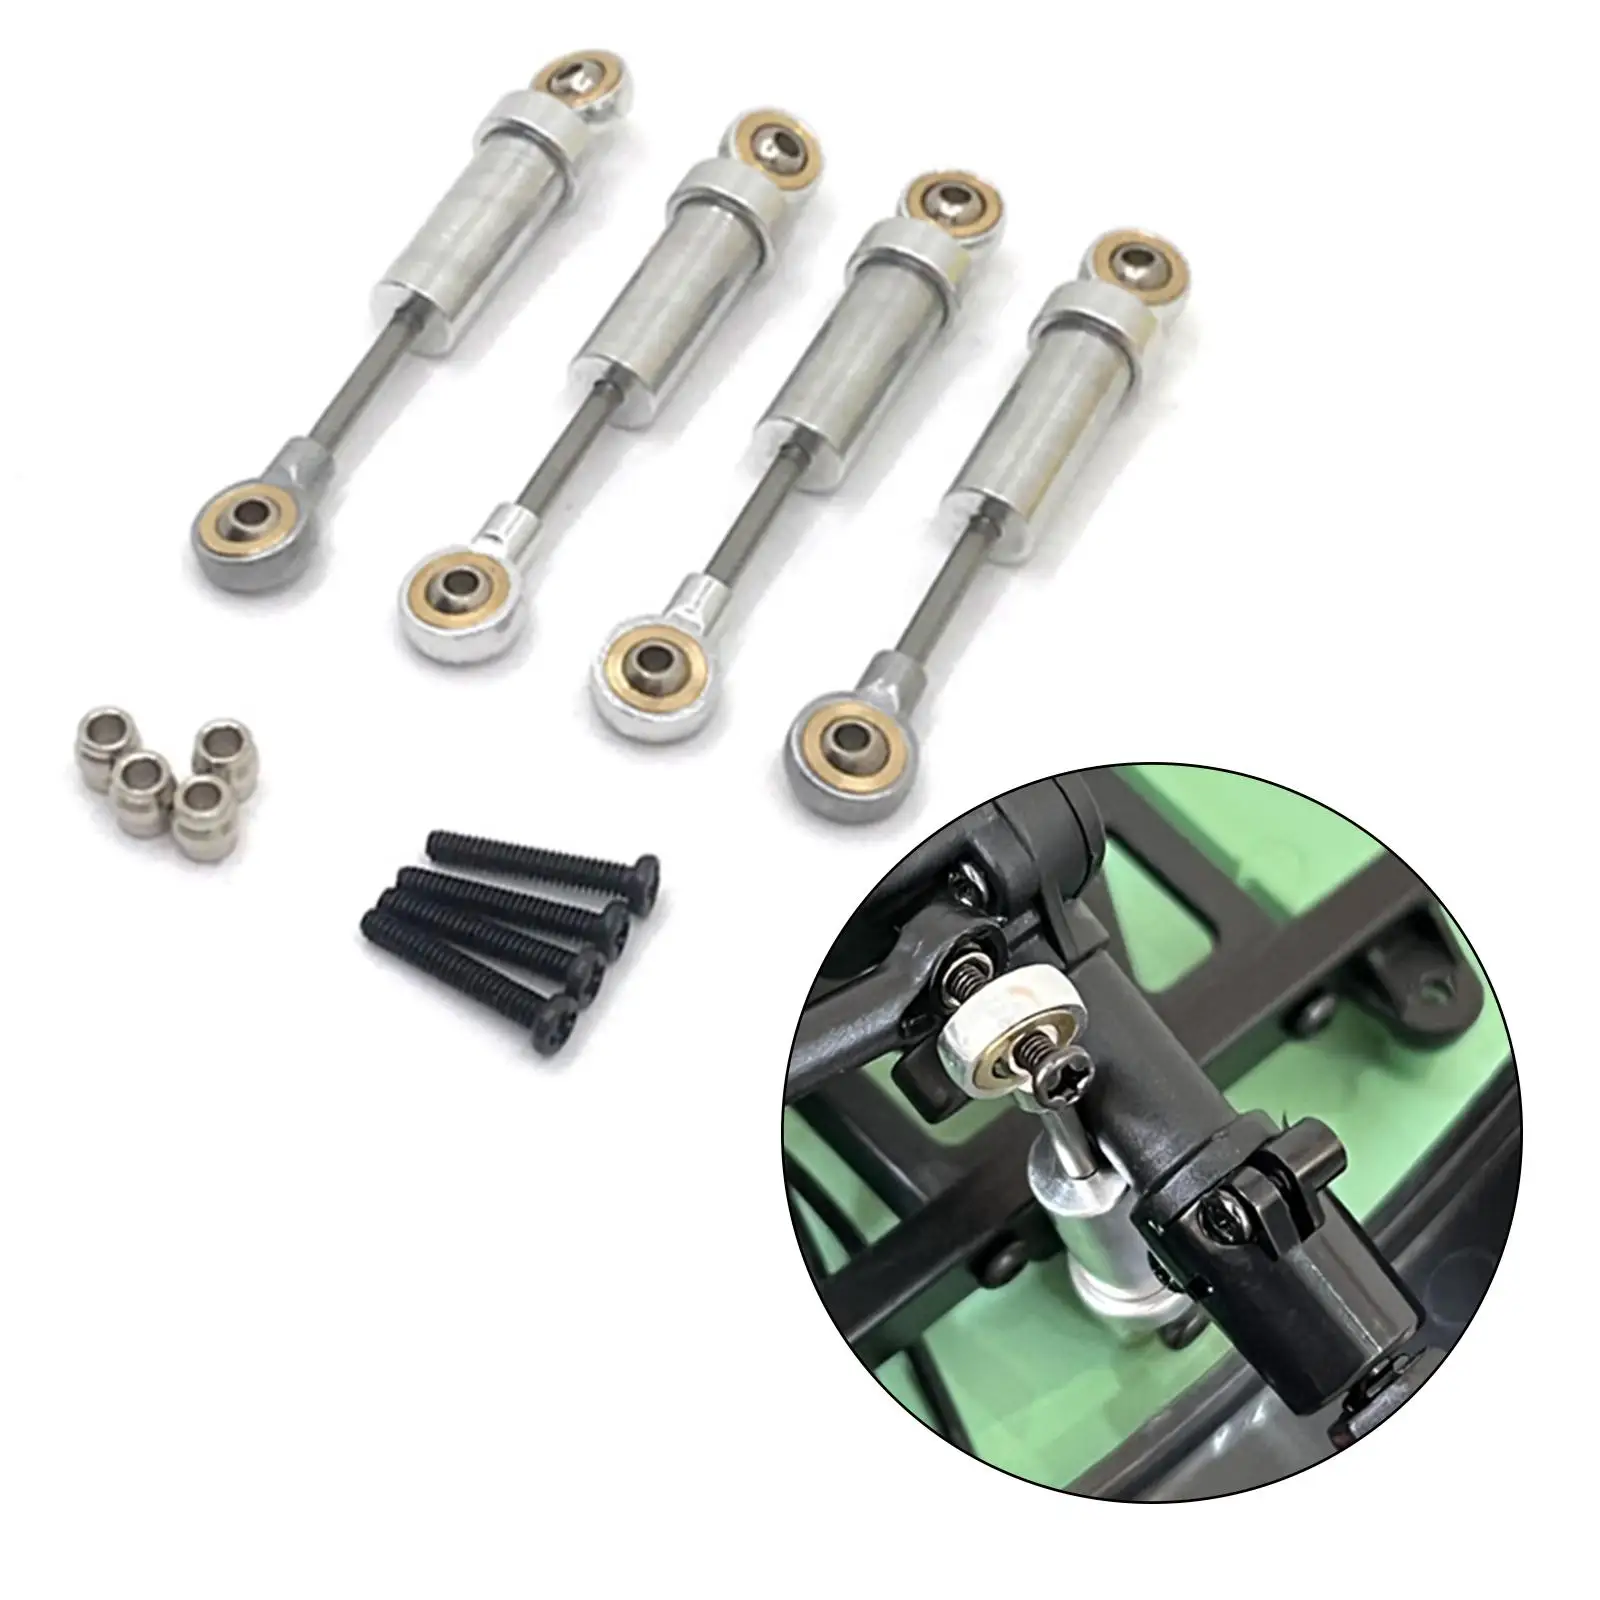 4 Pieces 1/18 RC Metal Shock Absorber Dampers Replacements for Fms Model Buggy Modification enlarge